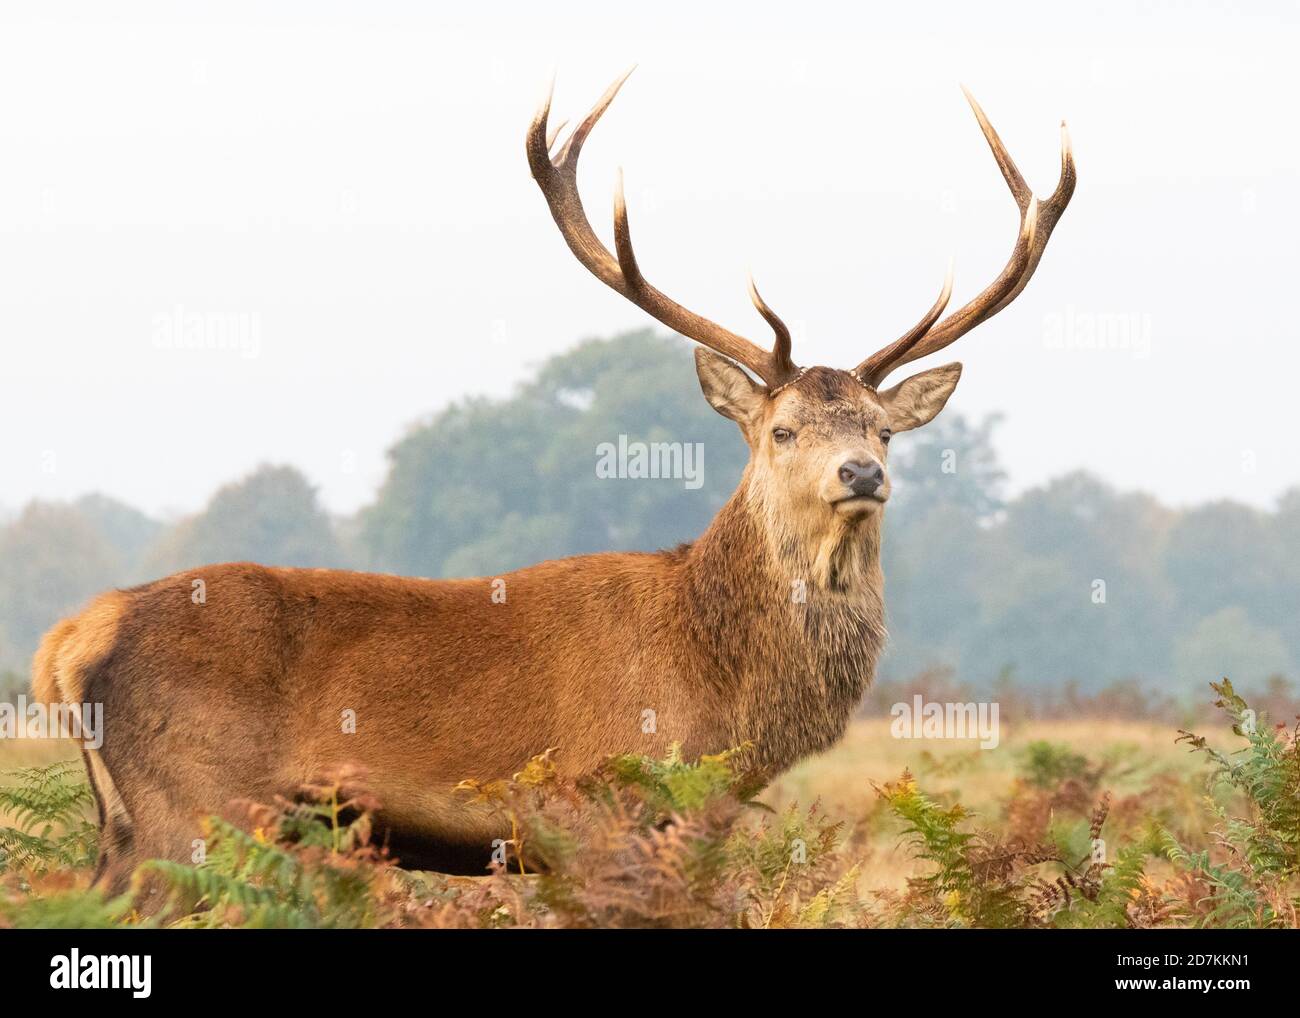 A statuesque red deer stag stands arrogantly in the bracken in Bushy Park, West London Stock Photo